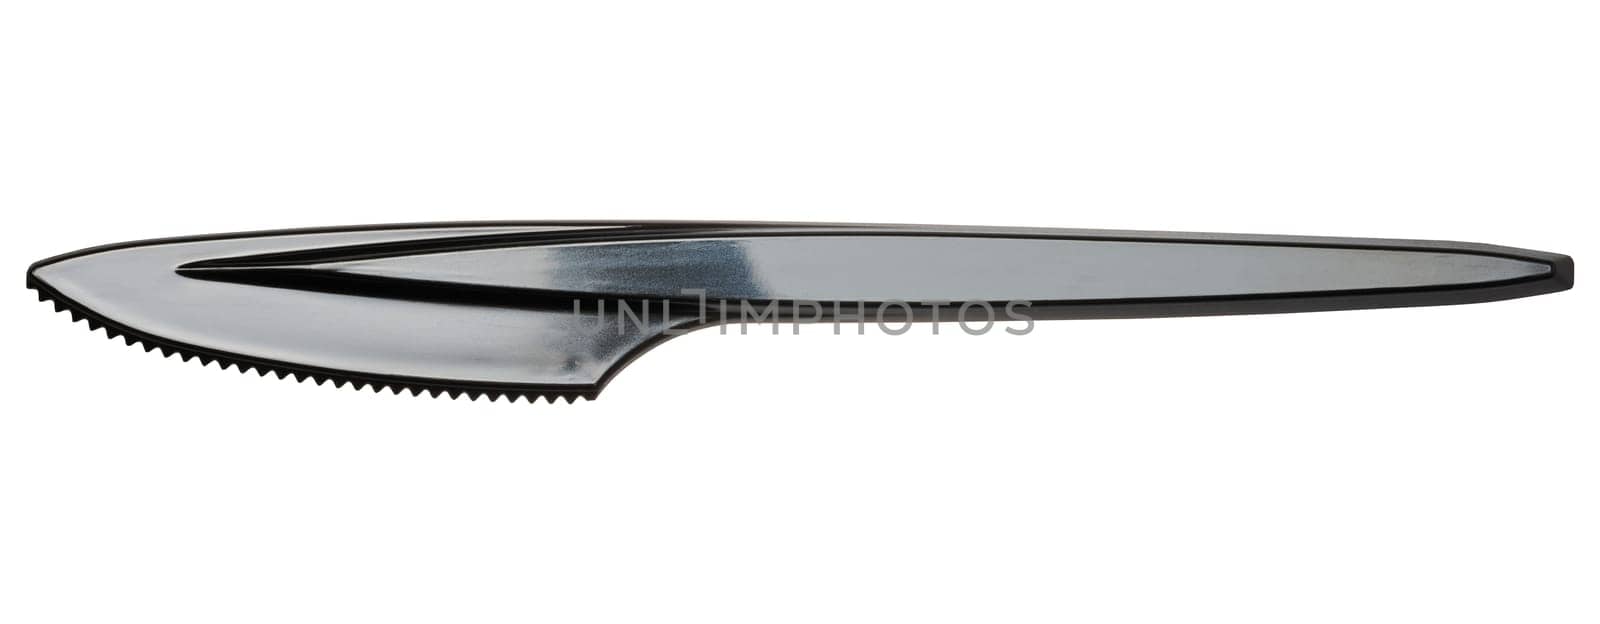 Black plastic disposable knife on isolated background by ndanko